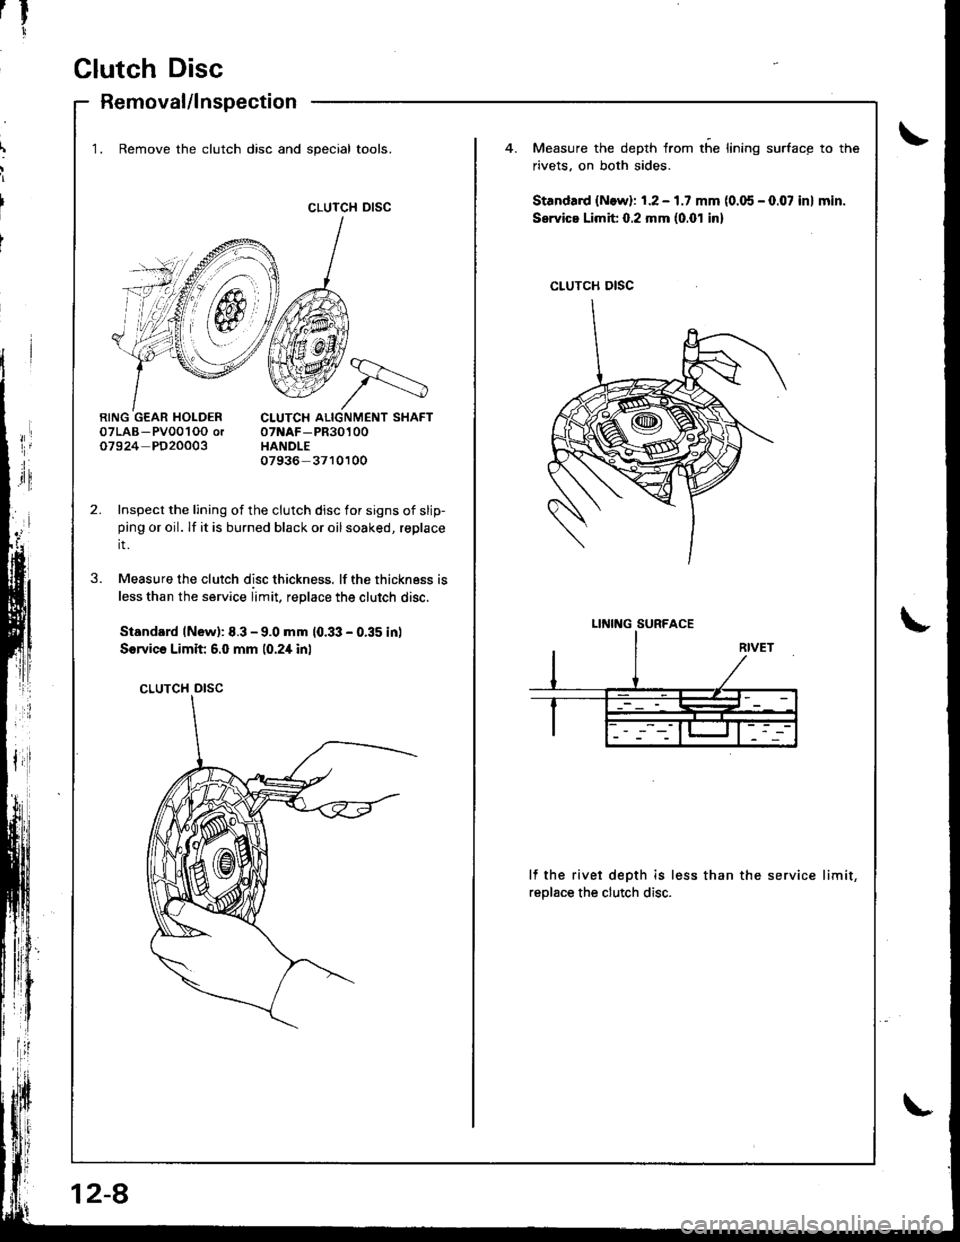 HONDA INTEGRA 1998 4.G Workshop Manual rtr
1
Clutch Disc
Removal/lnspection
CLUTCH DISC
1. Remove the clutch disc and special tools.Measure the depth from the lining surface to the
rivets. on both sides.
Standa.d {N.w}: 1.2 - 1.7 mm (0.05 